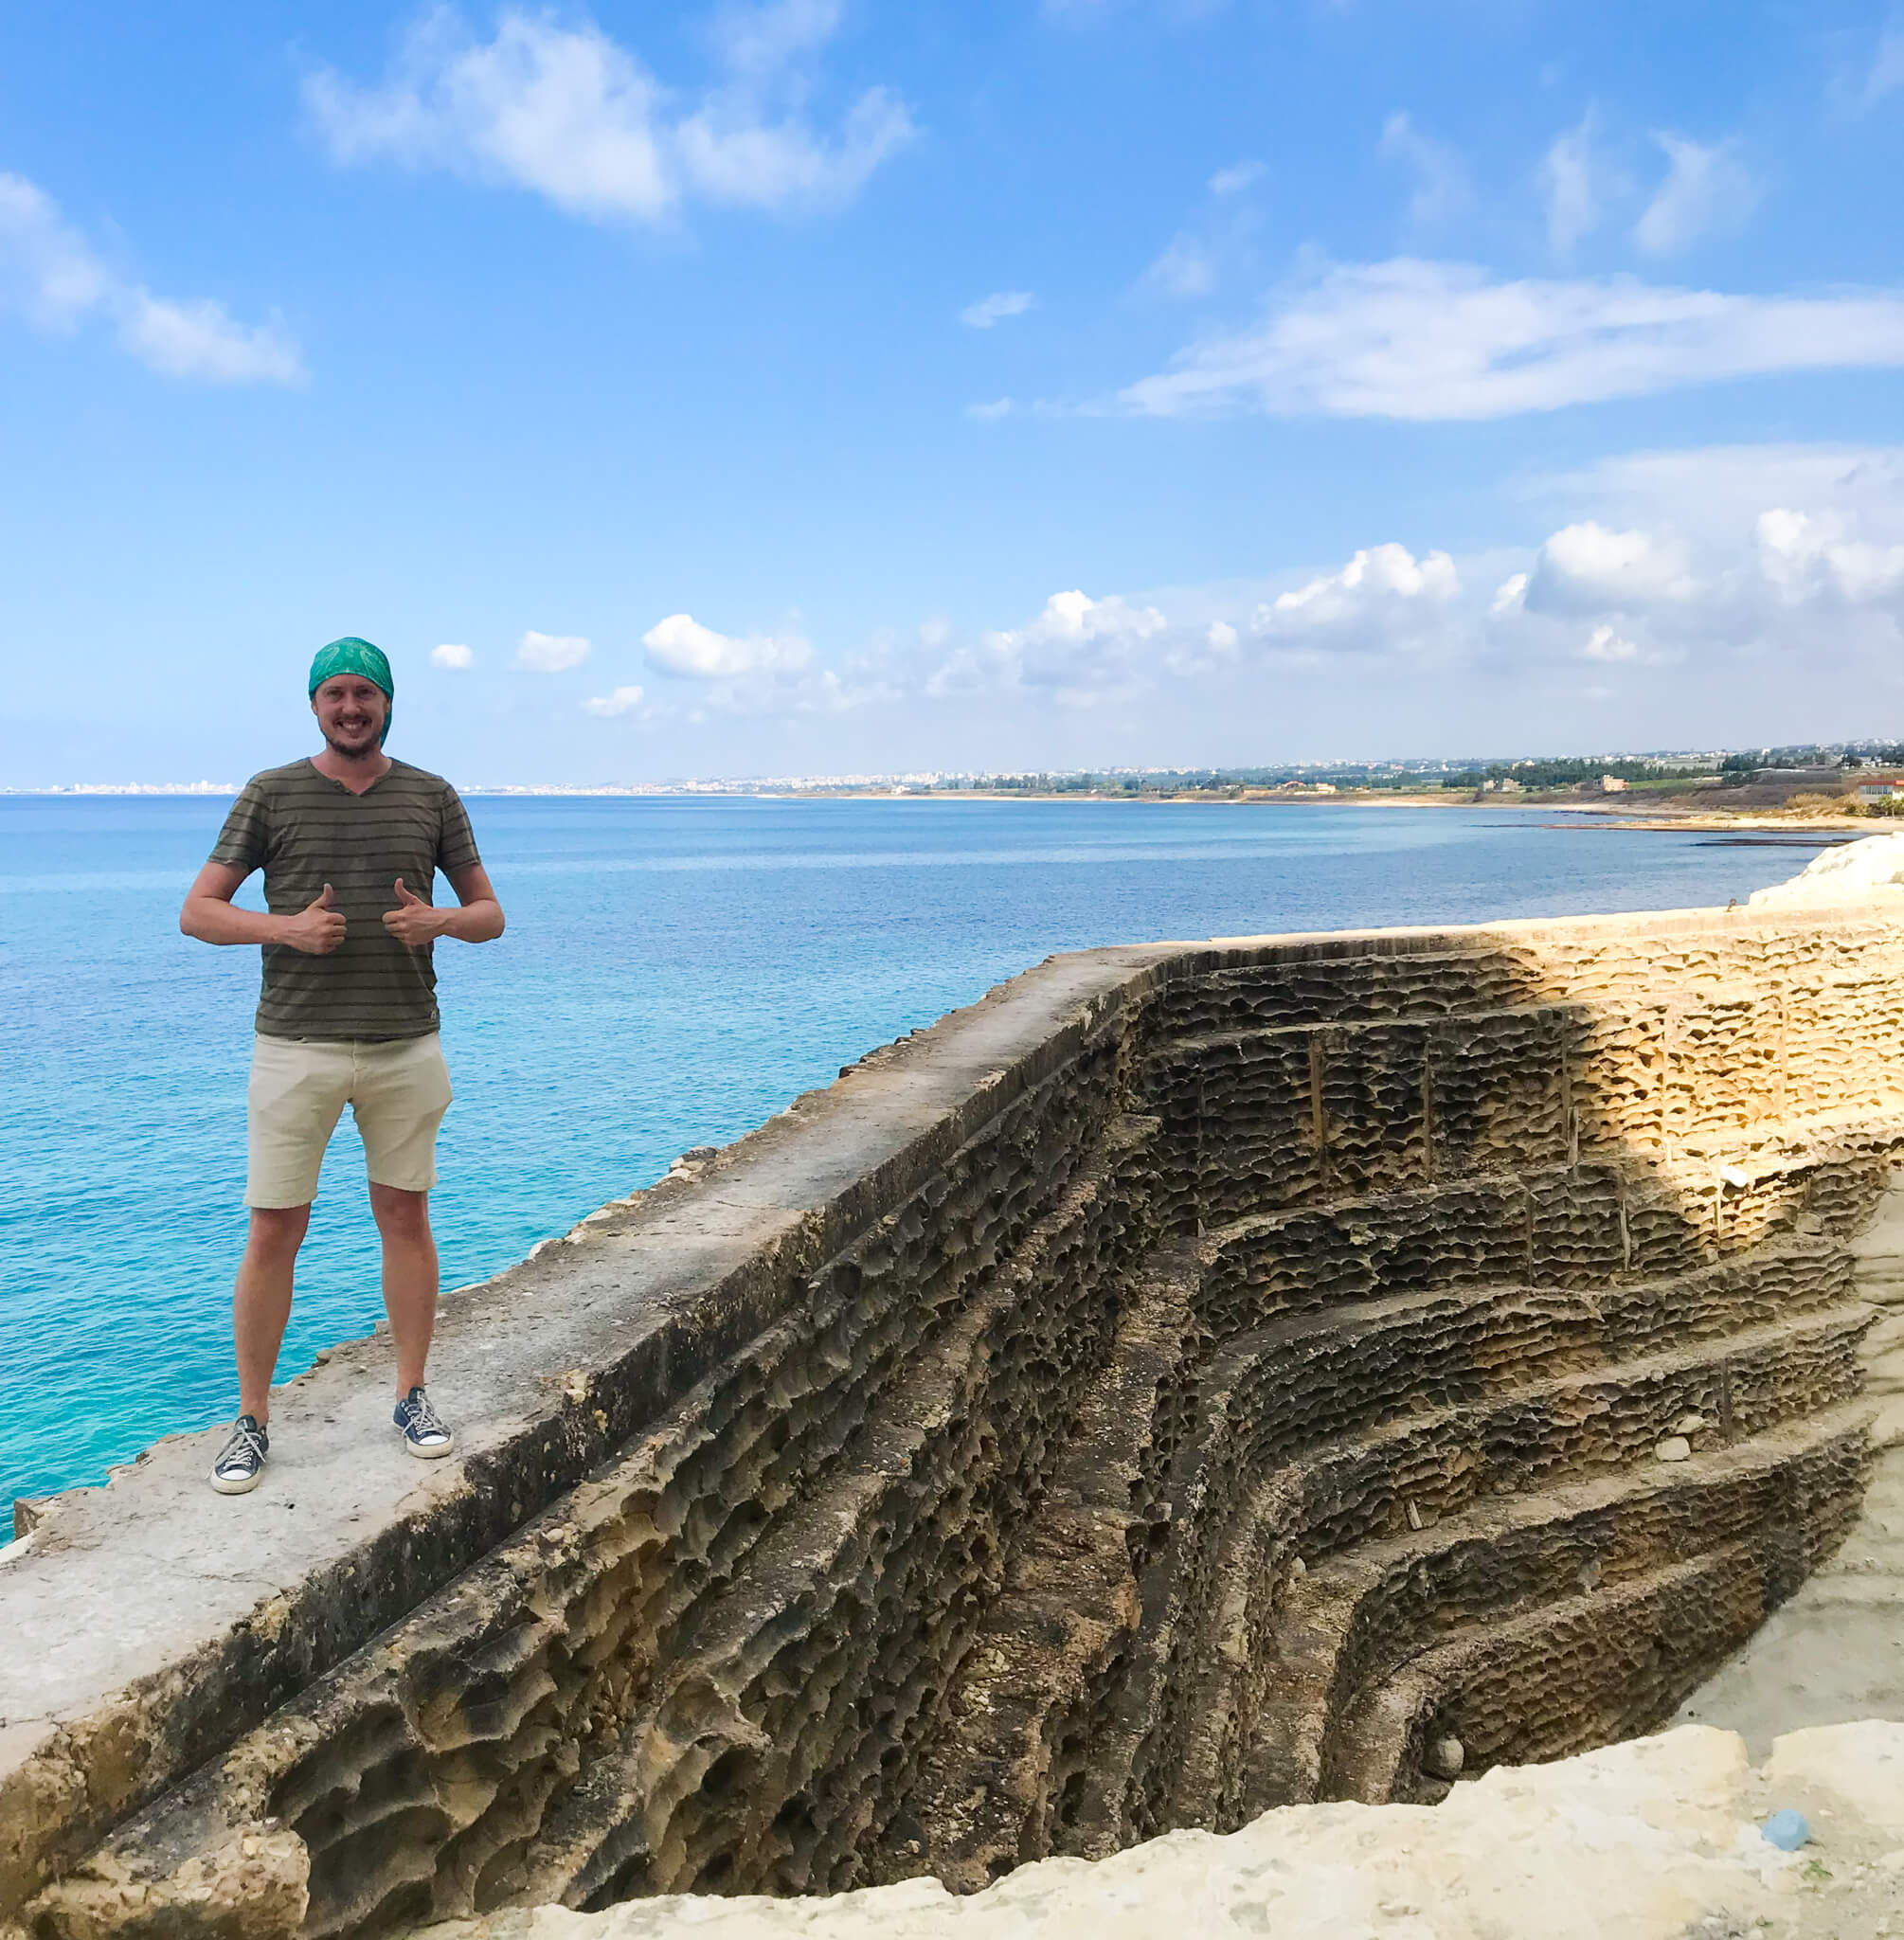 Me, standing on a sea wall with the blue Mediterranean in the background.